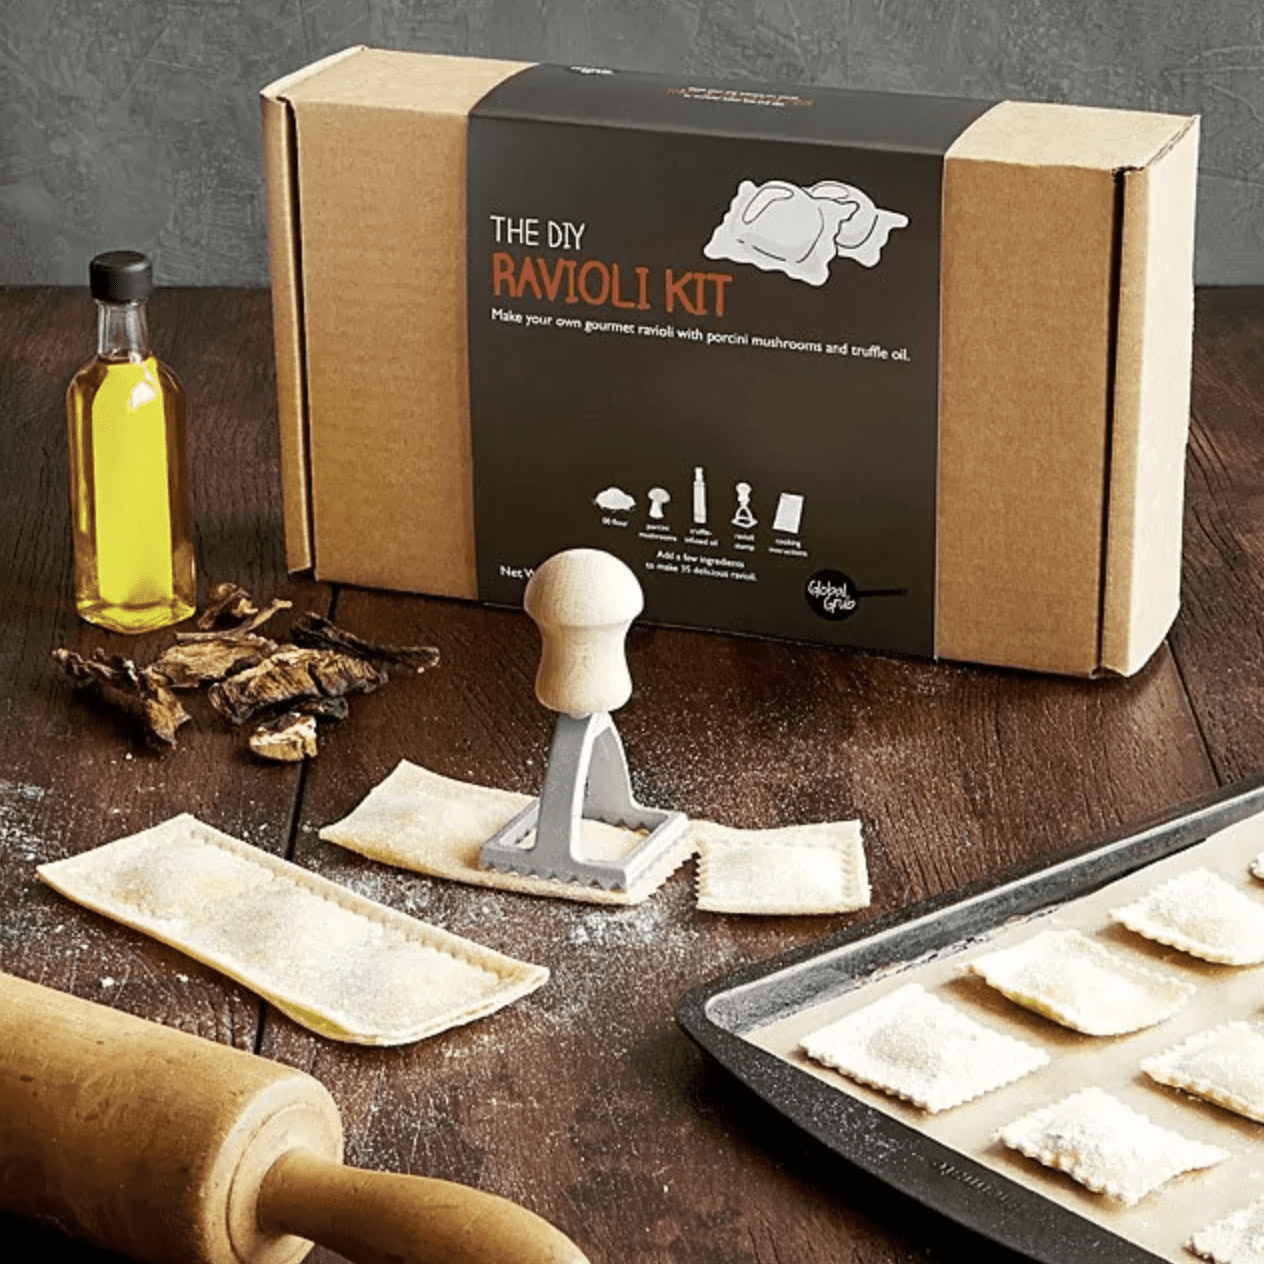 These Uncommon Goods DIY Food and Drink Kits Make Great Gifts